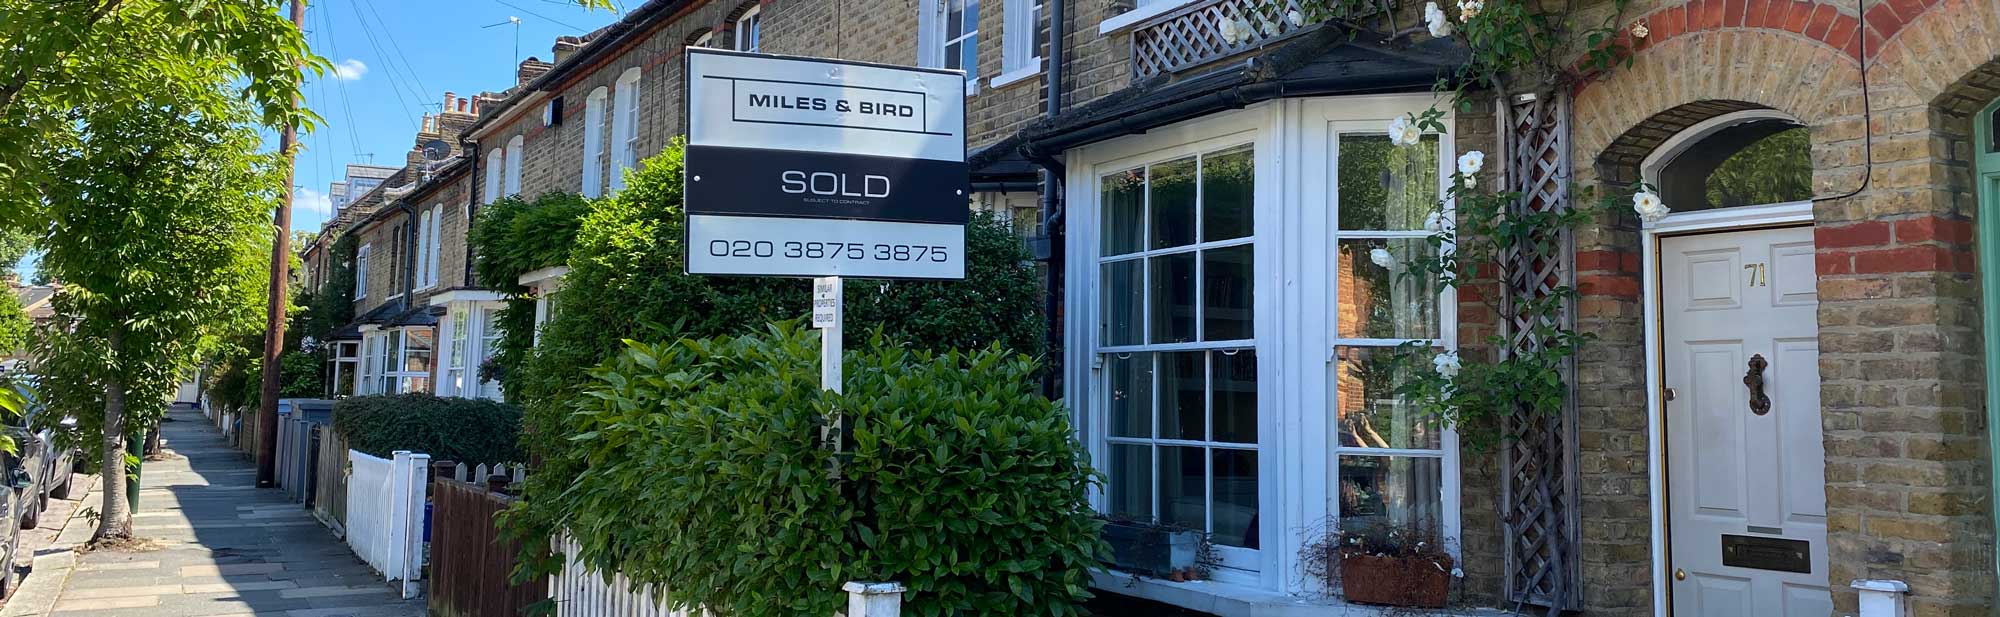 Miles & Bird Estate Agents in East Molesey